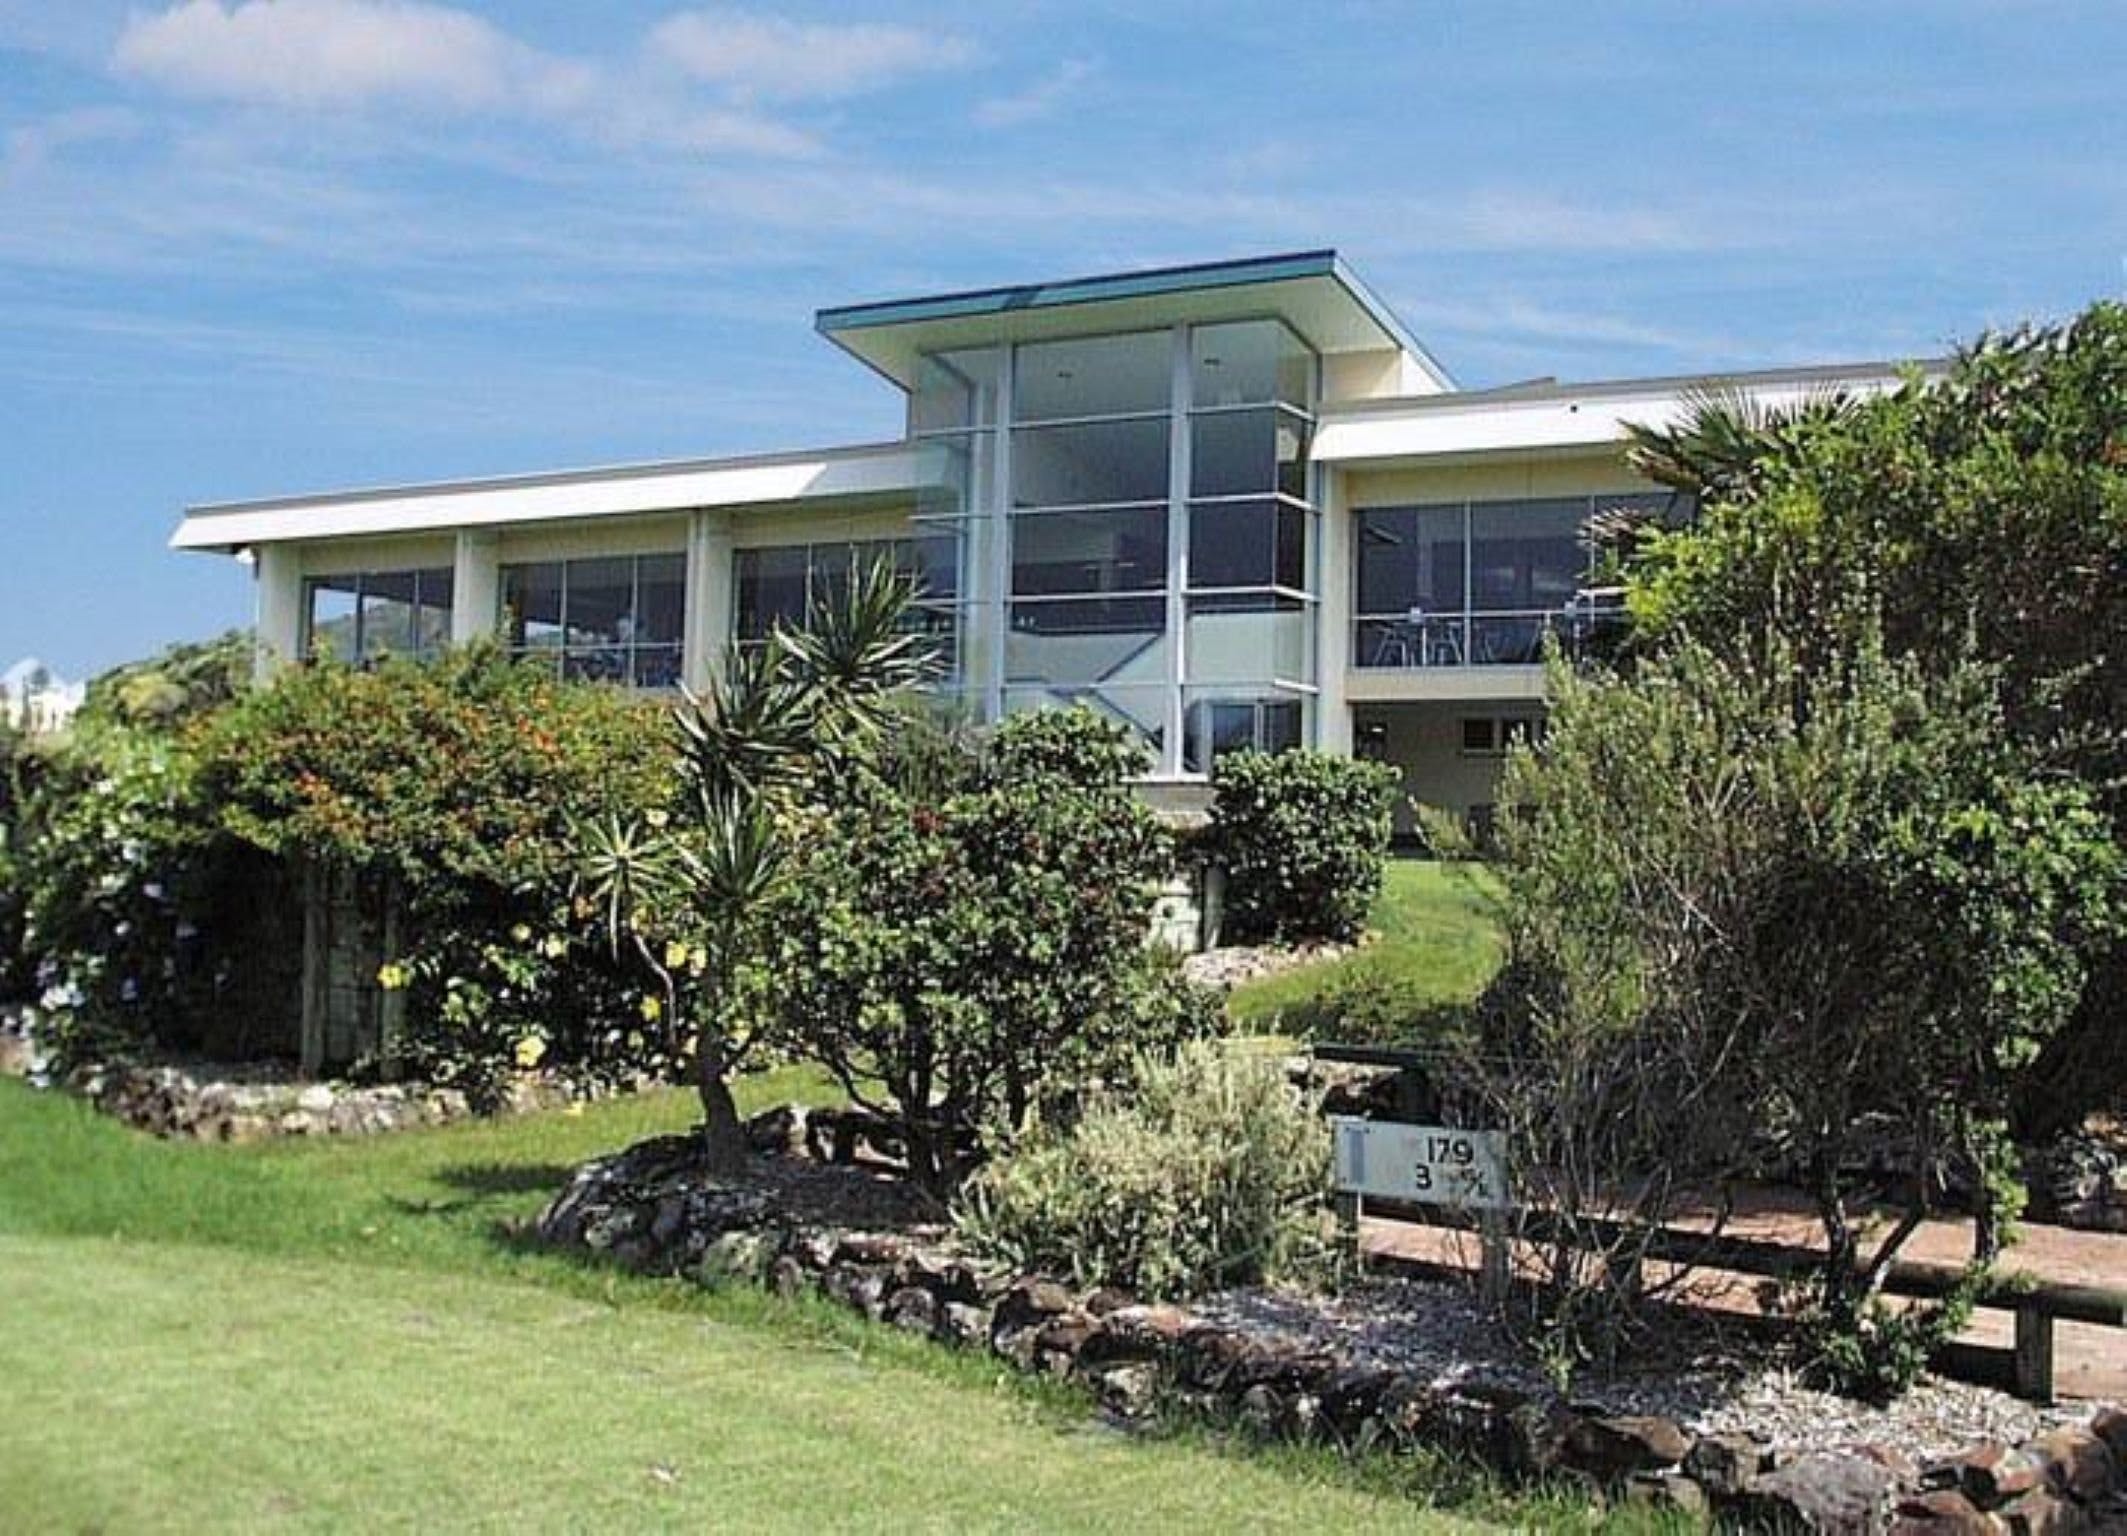 Forster Tuncurry Golf Club - Geraldton Accommodation